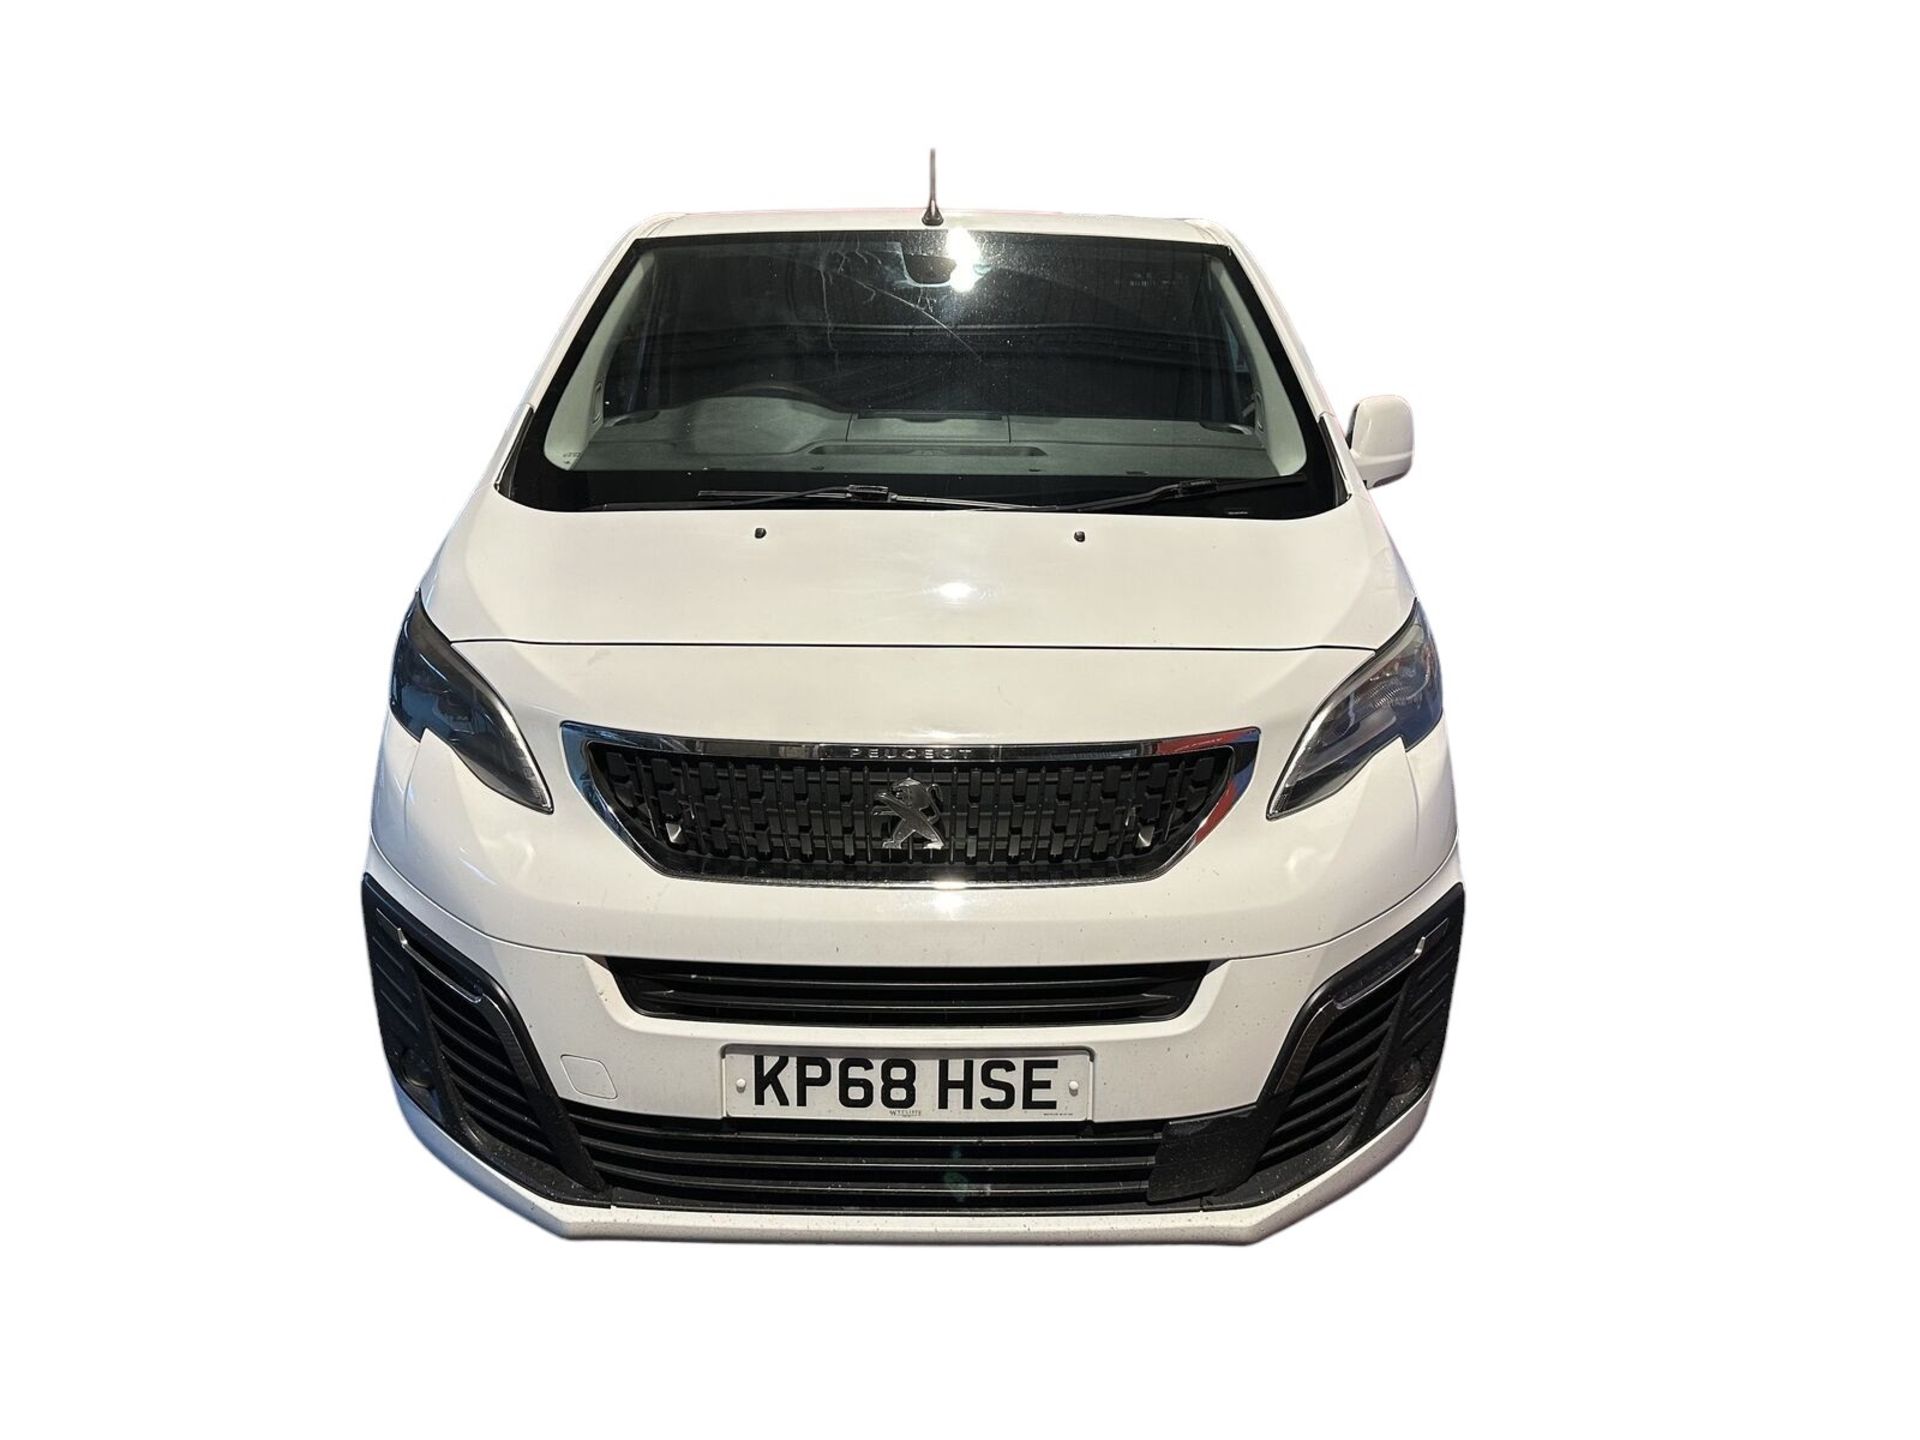 68 PLATE PEUGEOT EXPERT, AUTO, IMMACULATE BEAUTY >>--NO VAT ON HAMMER--<< - Image 3 of 12